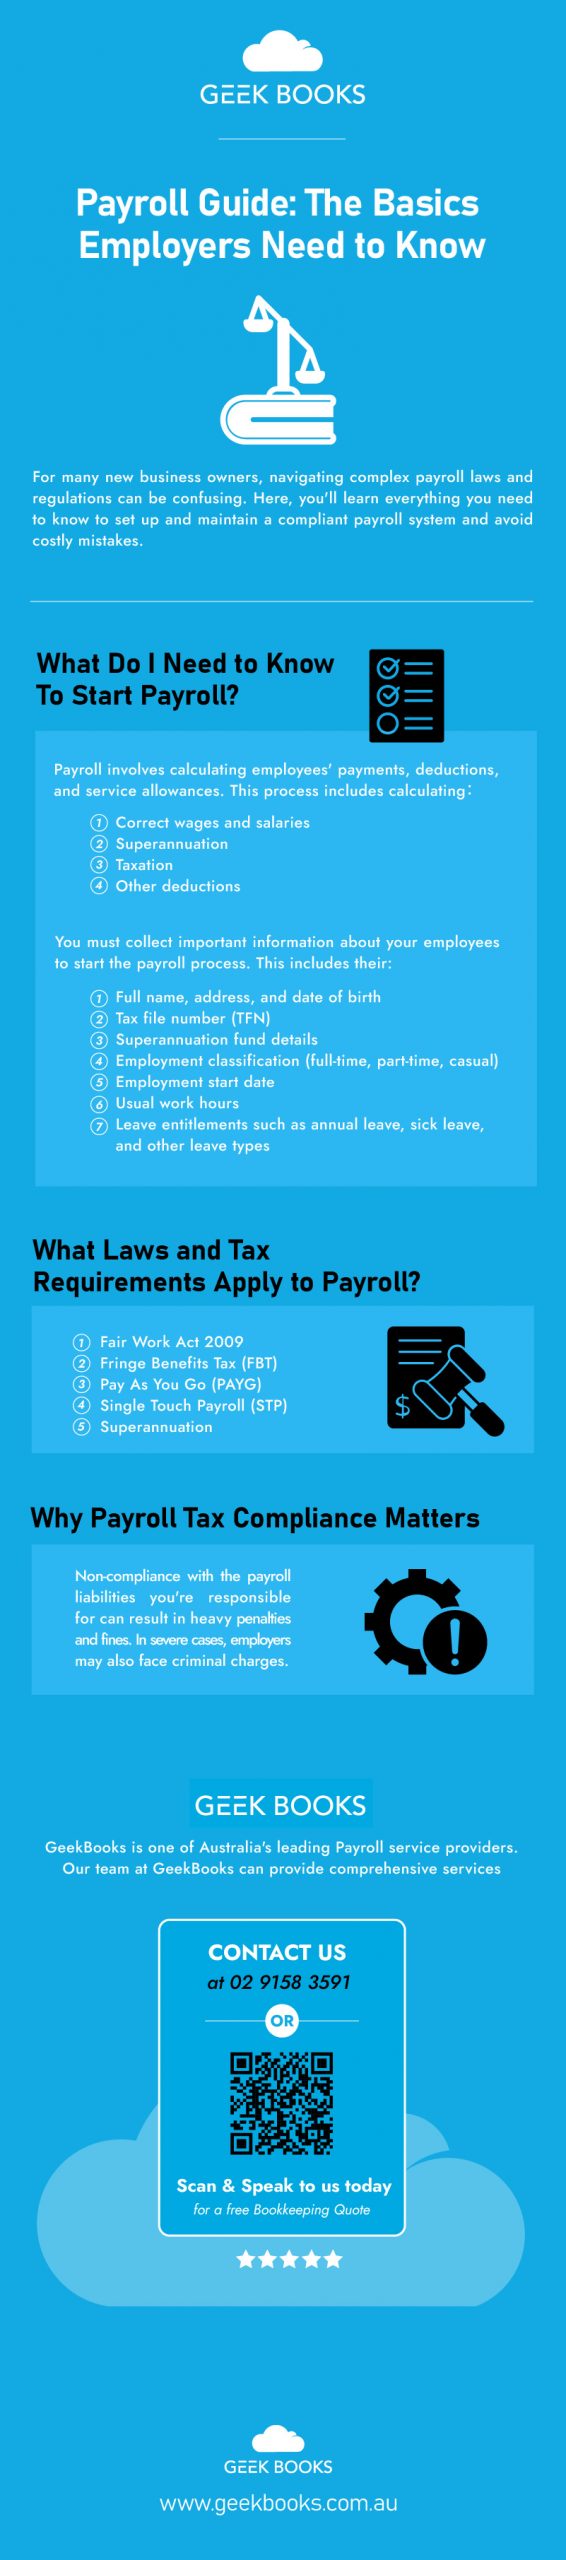 Payroll Guide - The Basics Employers Need To Know Infographic